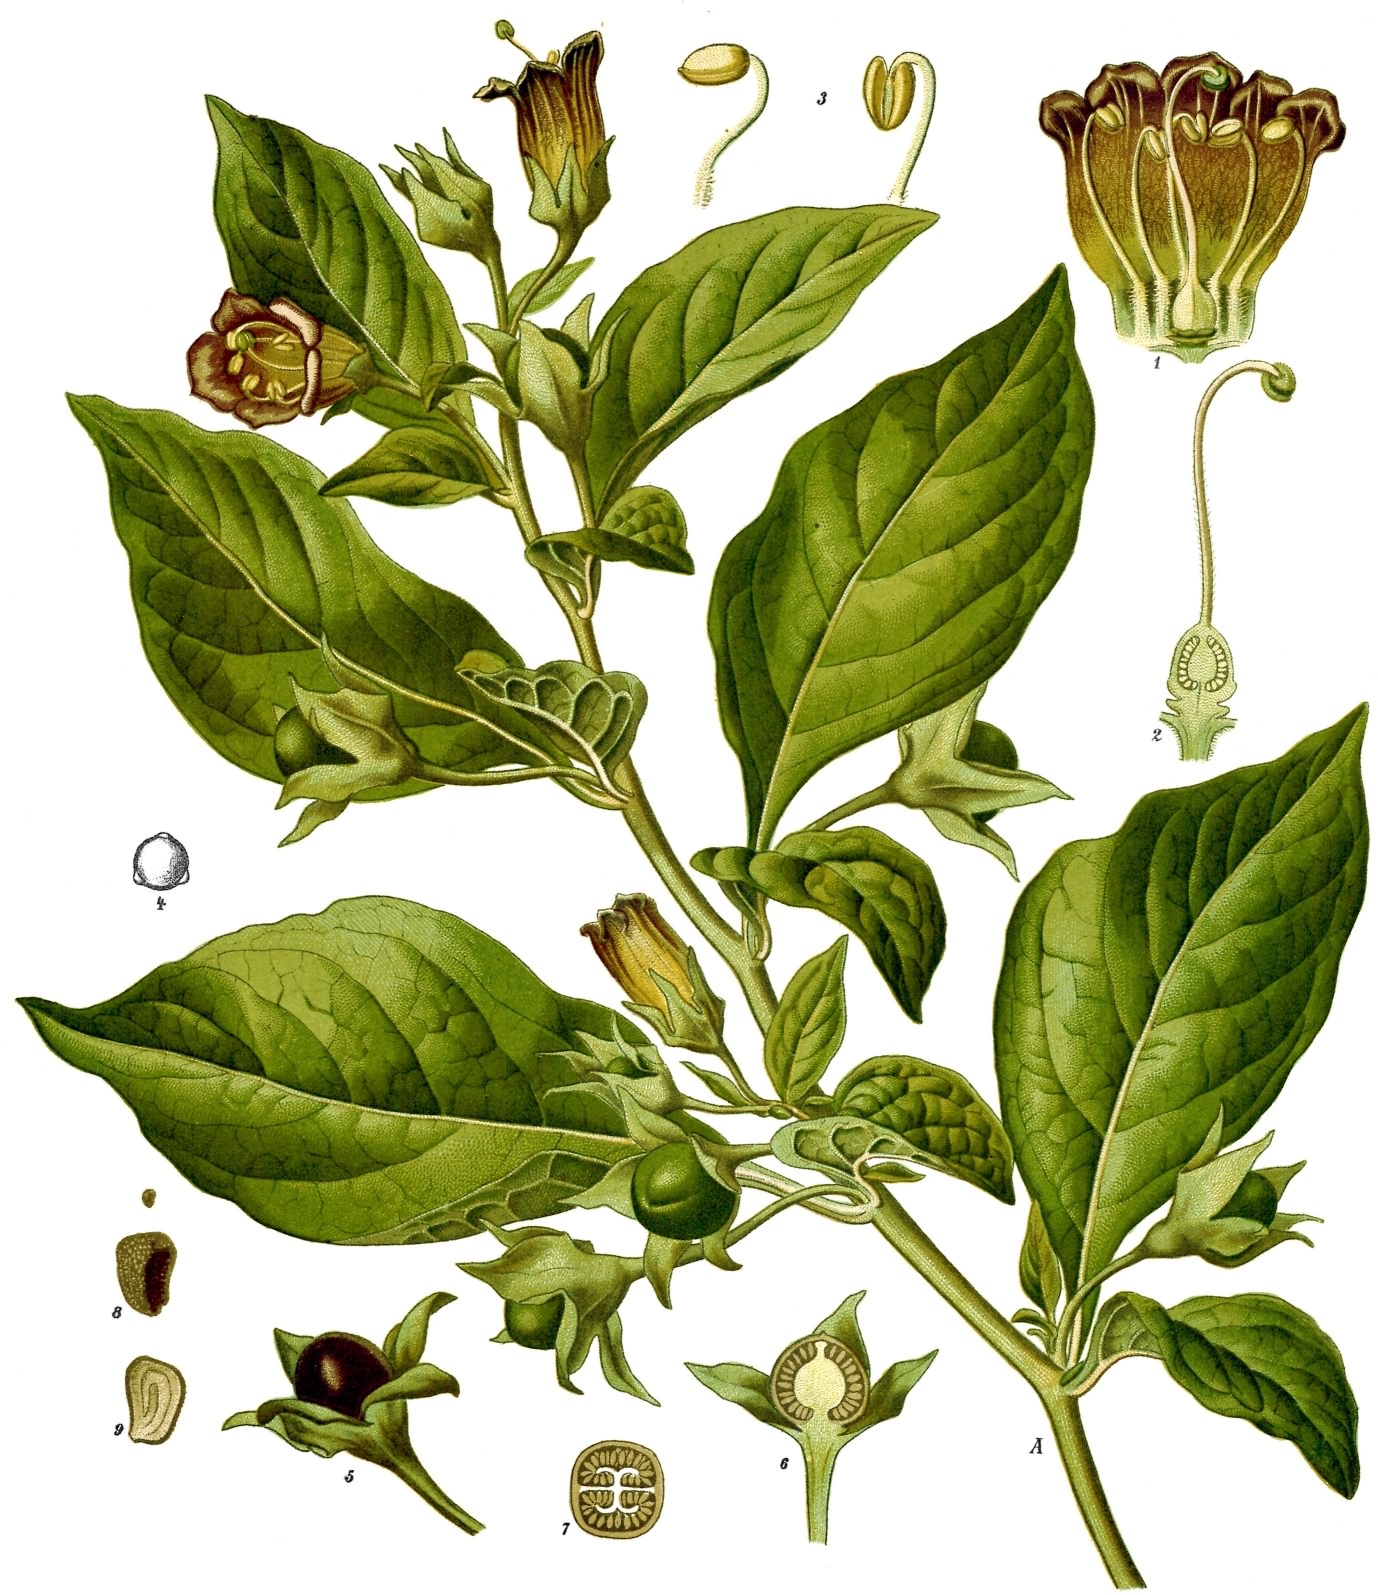 Deadly Nightshade - Atropa belladonna, click for a larger image, image is in the public domain